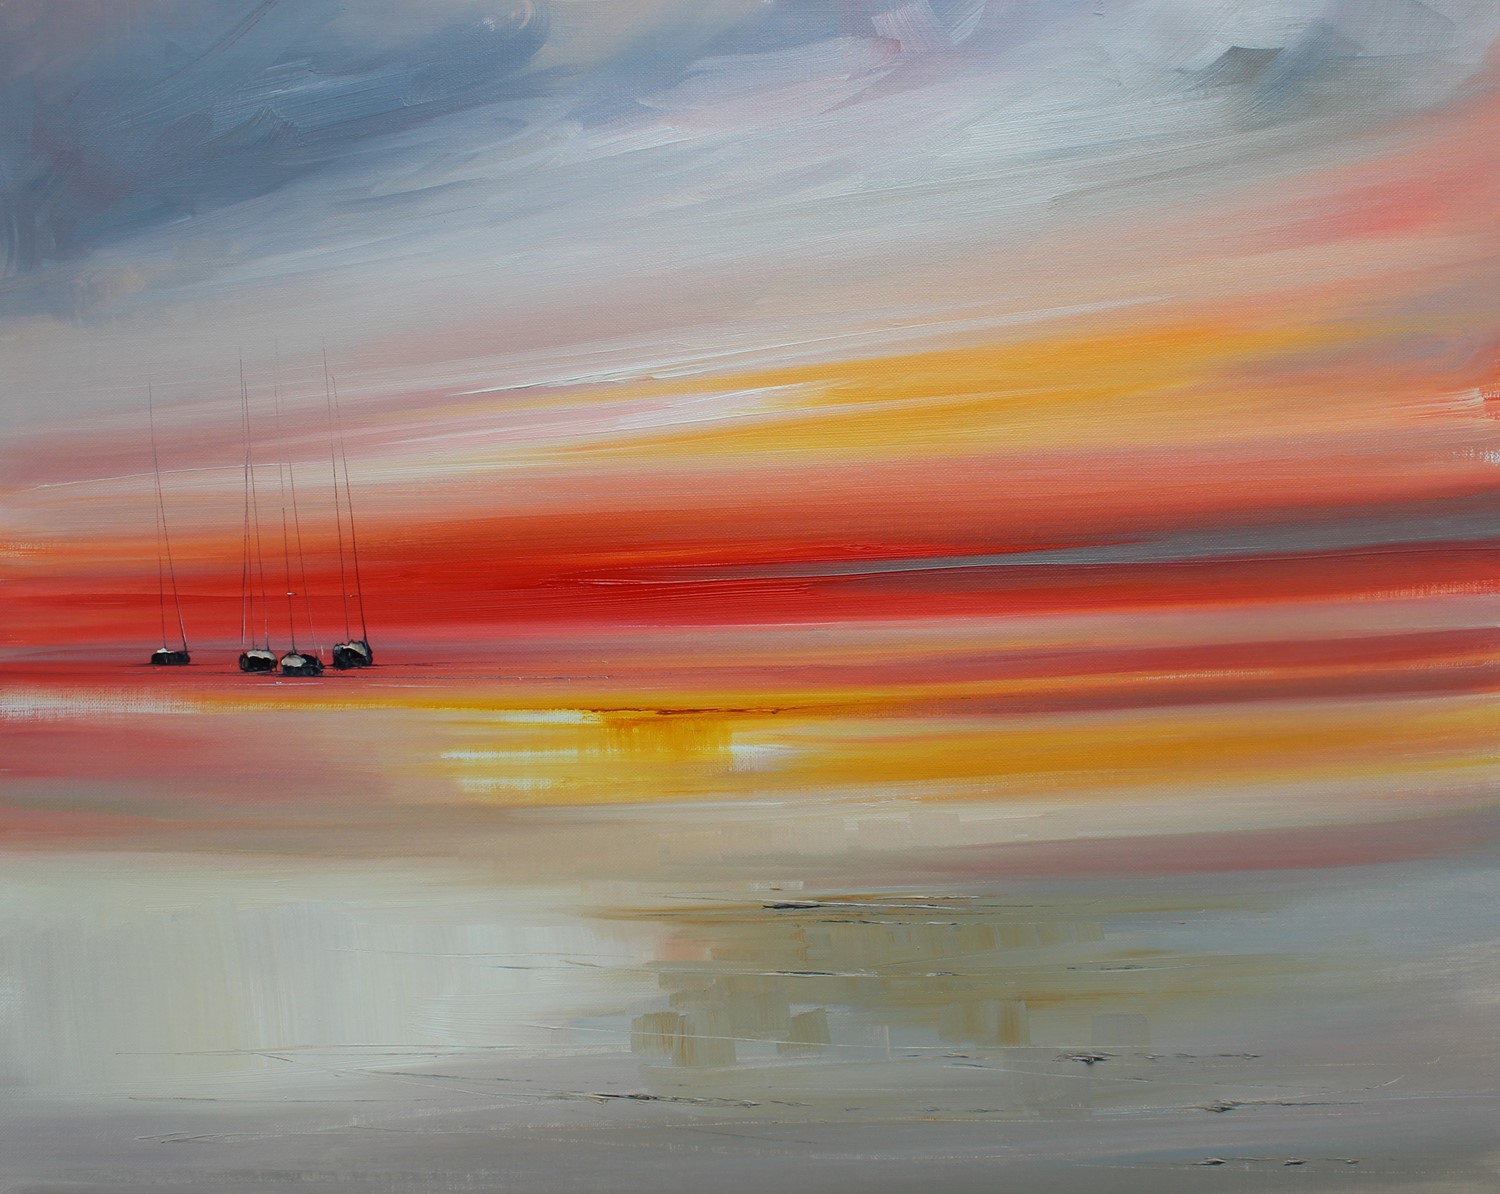 'What a Sunset!' by artist Rosanne Barr